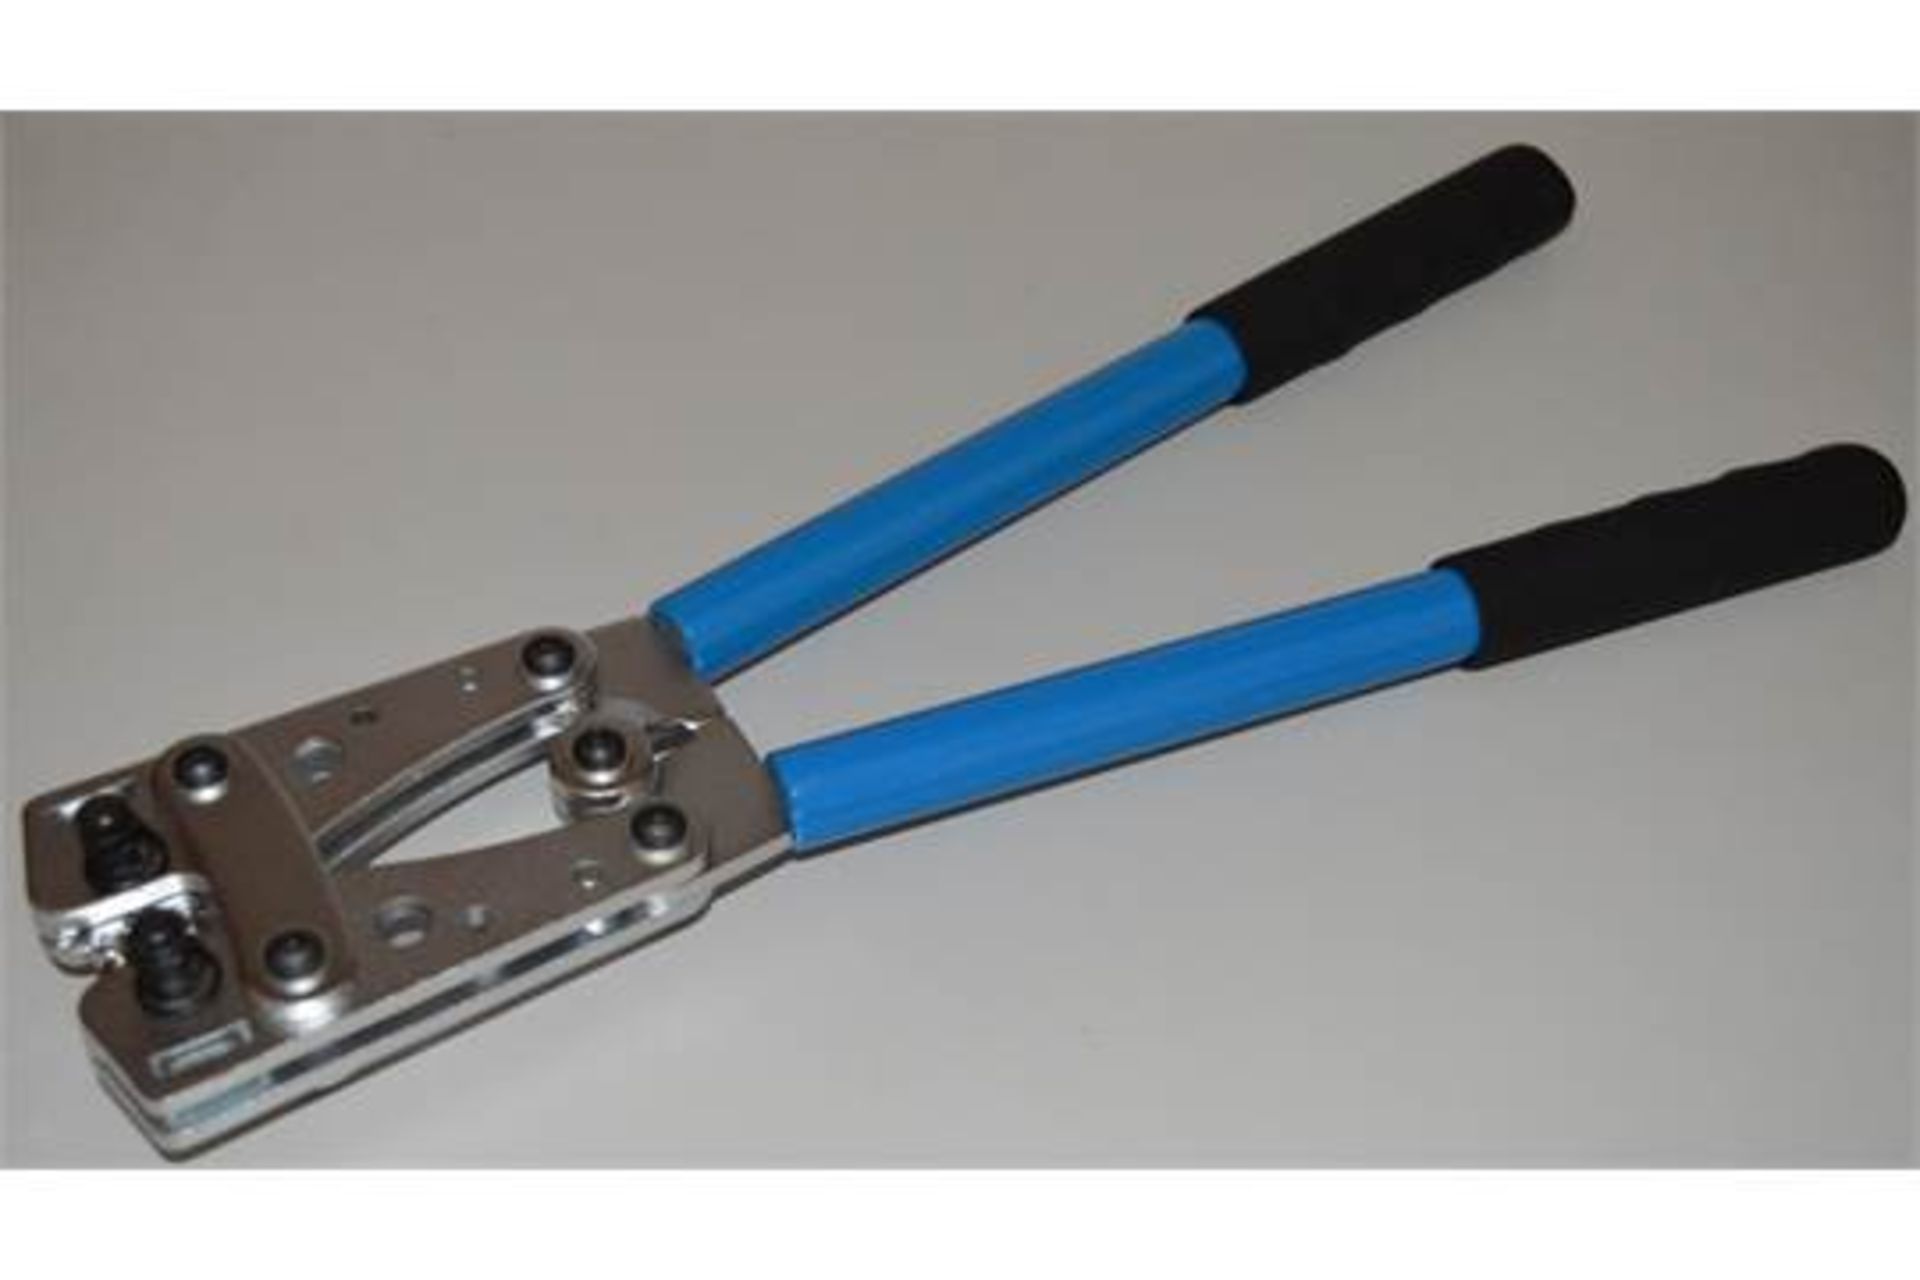 1 x HD Copper Tube Terminal Crimp Tool With Adjustable Hex - 38cm Length - XXX Branded - New and - Image 8 of 10